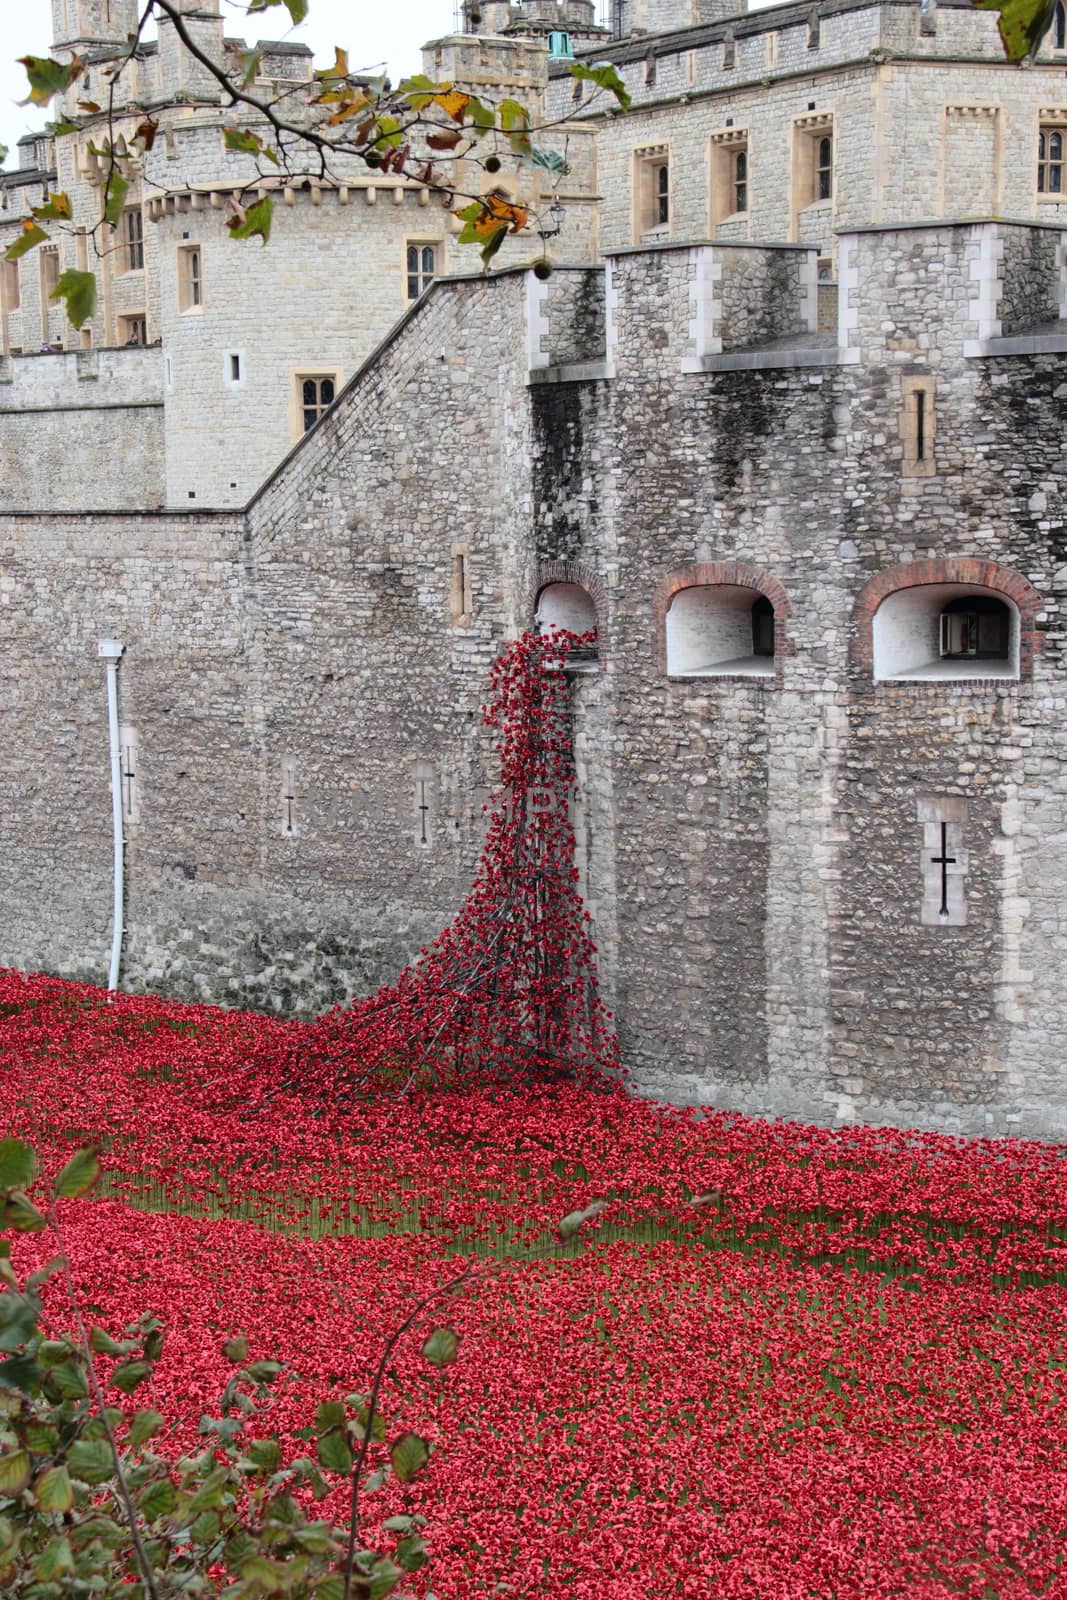 Poppies at The Tower of London London UK by mitzy